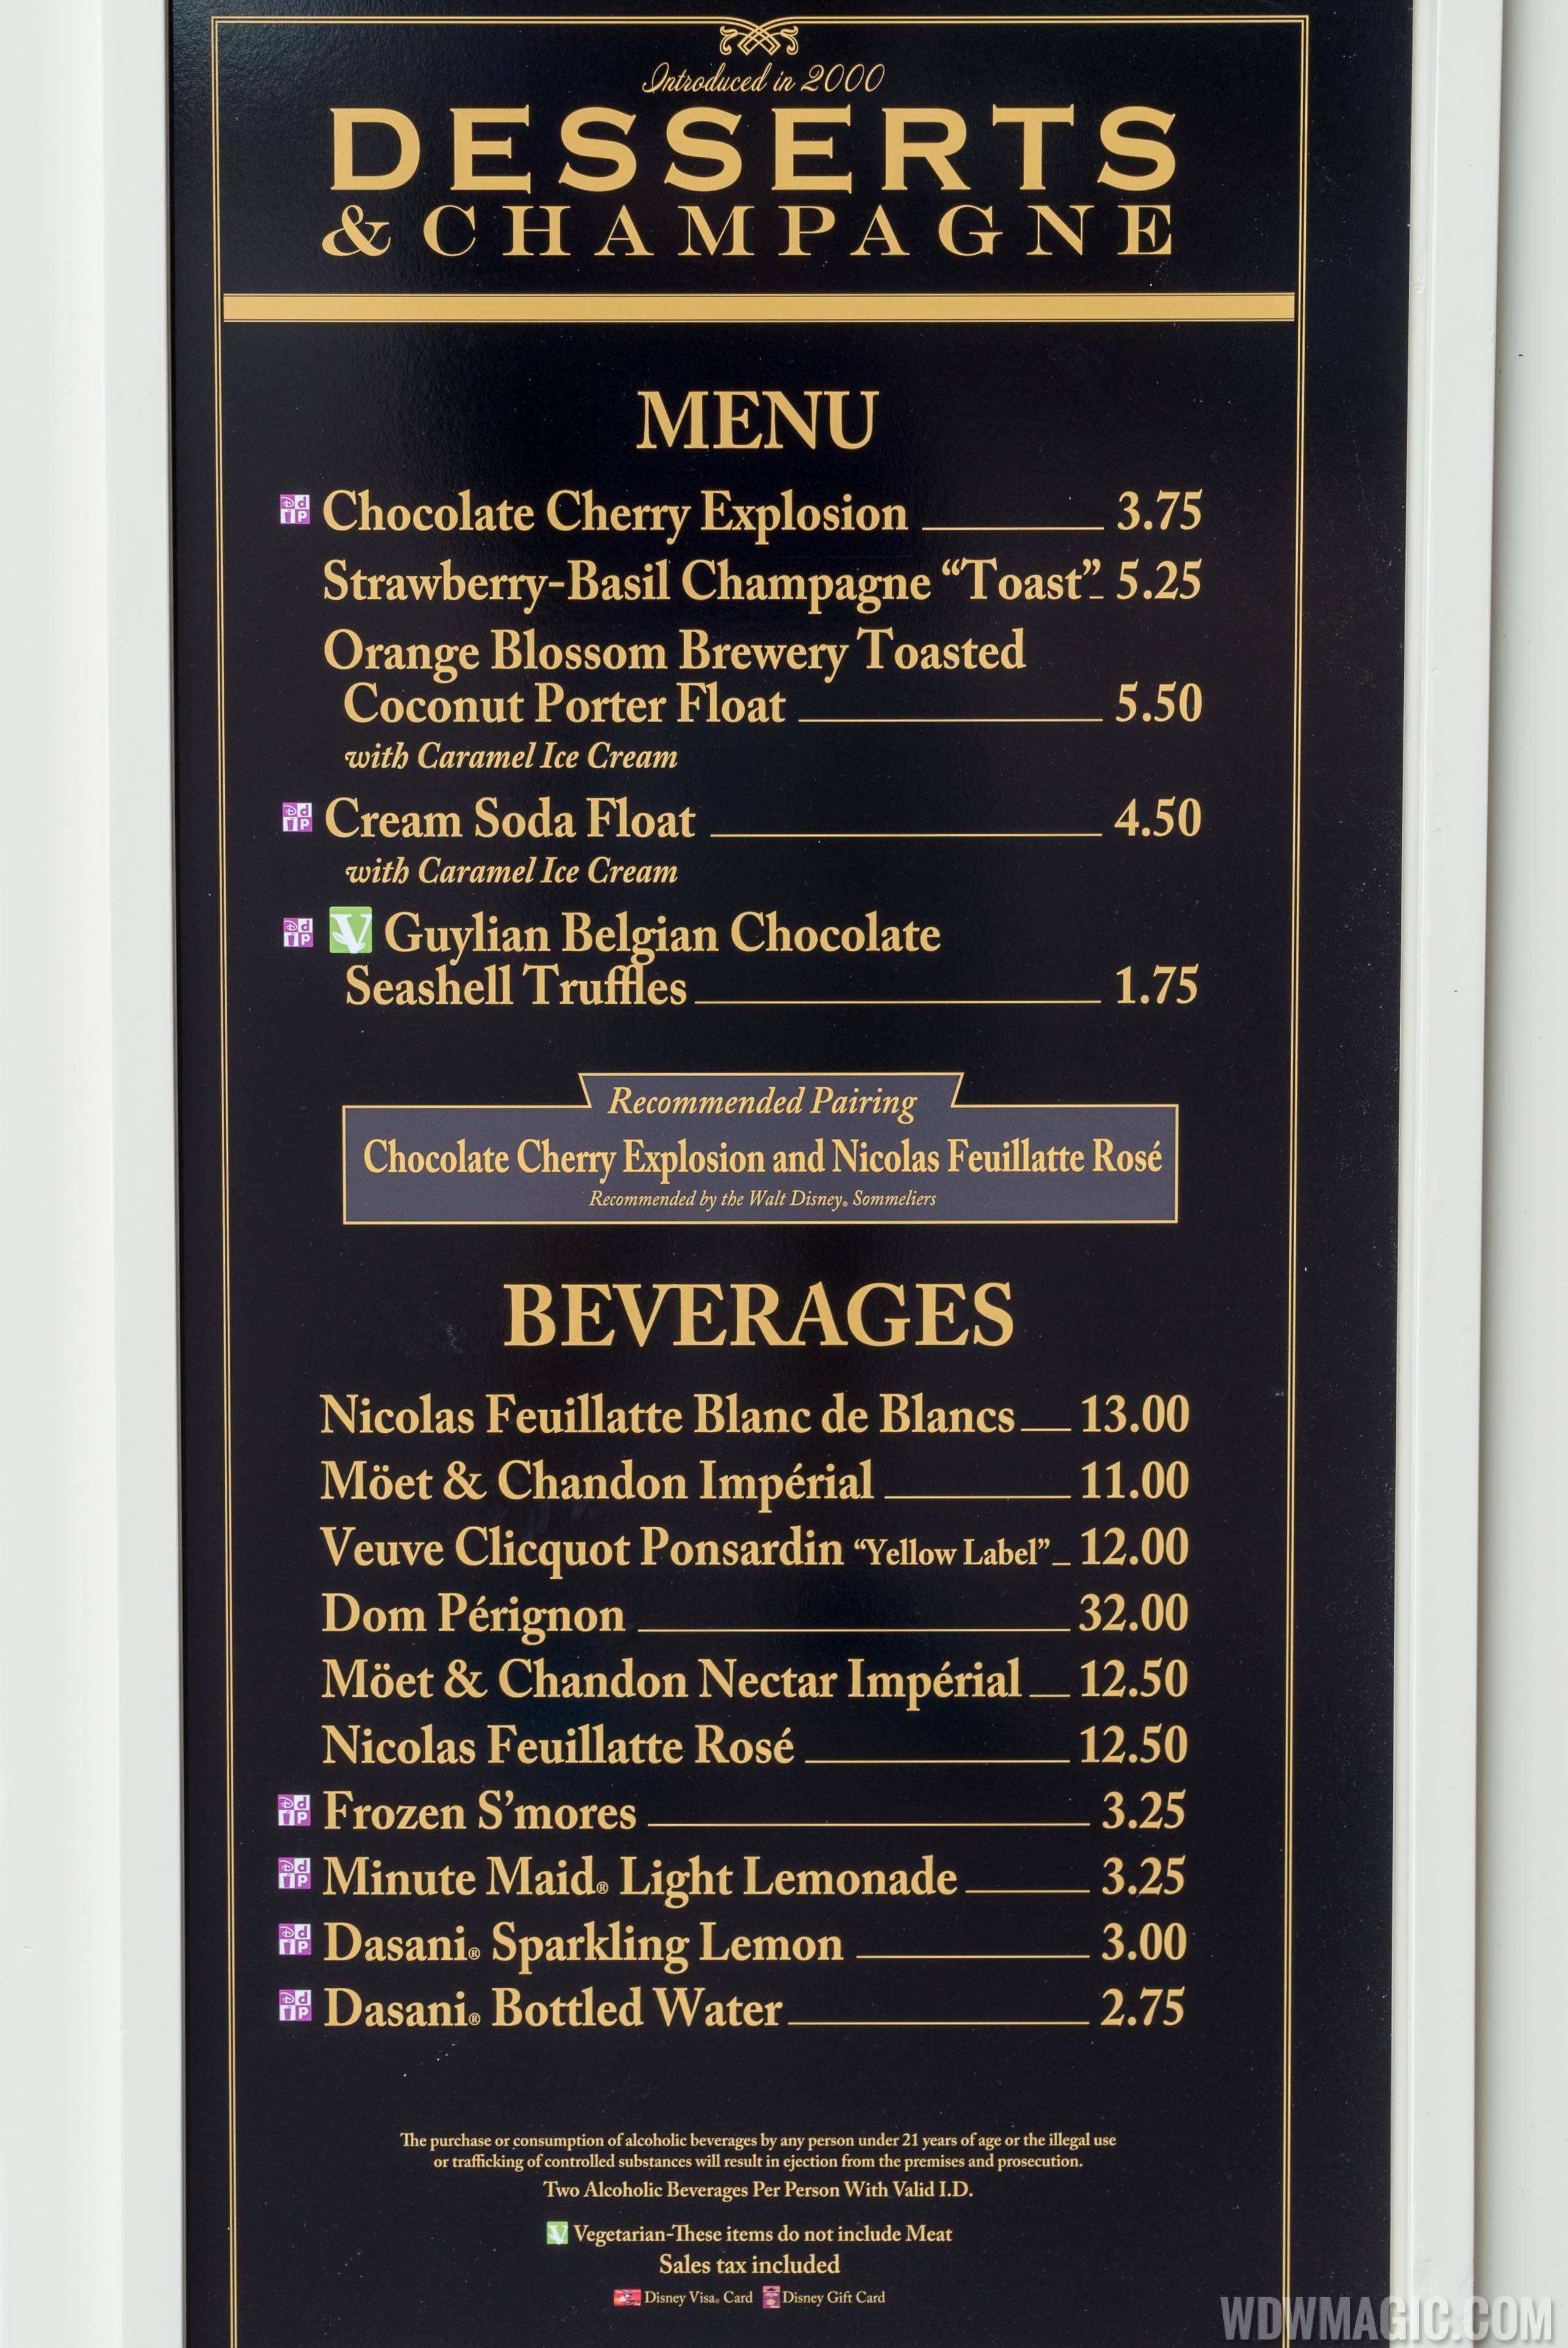 2015 Epcot Food and Wine Festival Marketplace kiosk - Desserts and Champagne menu